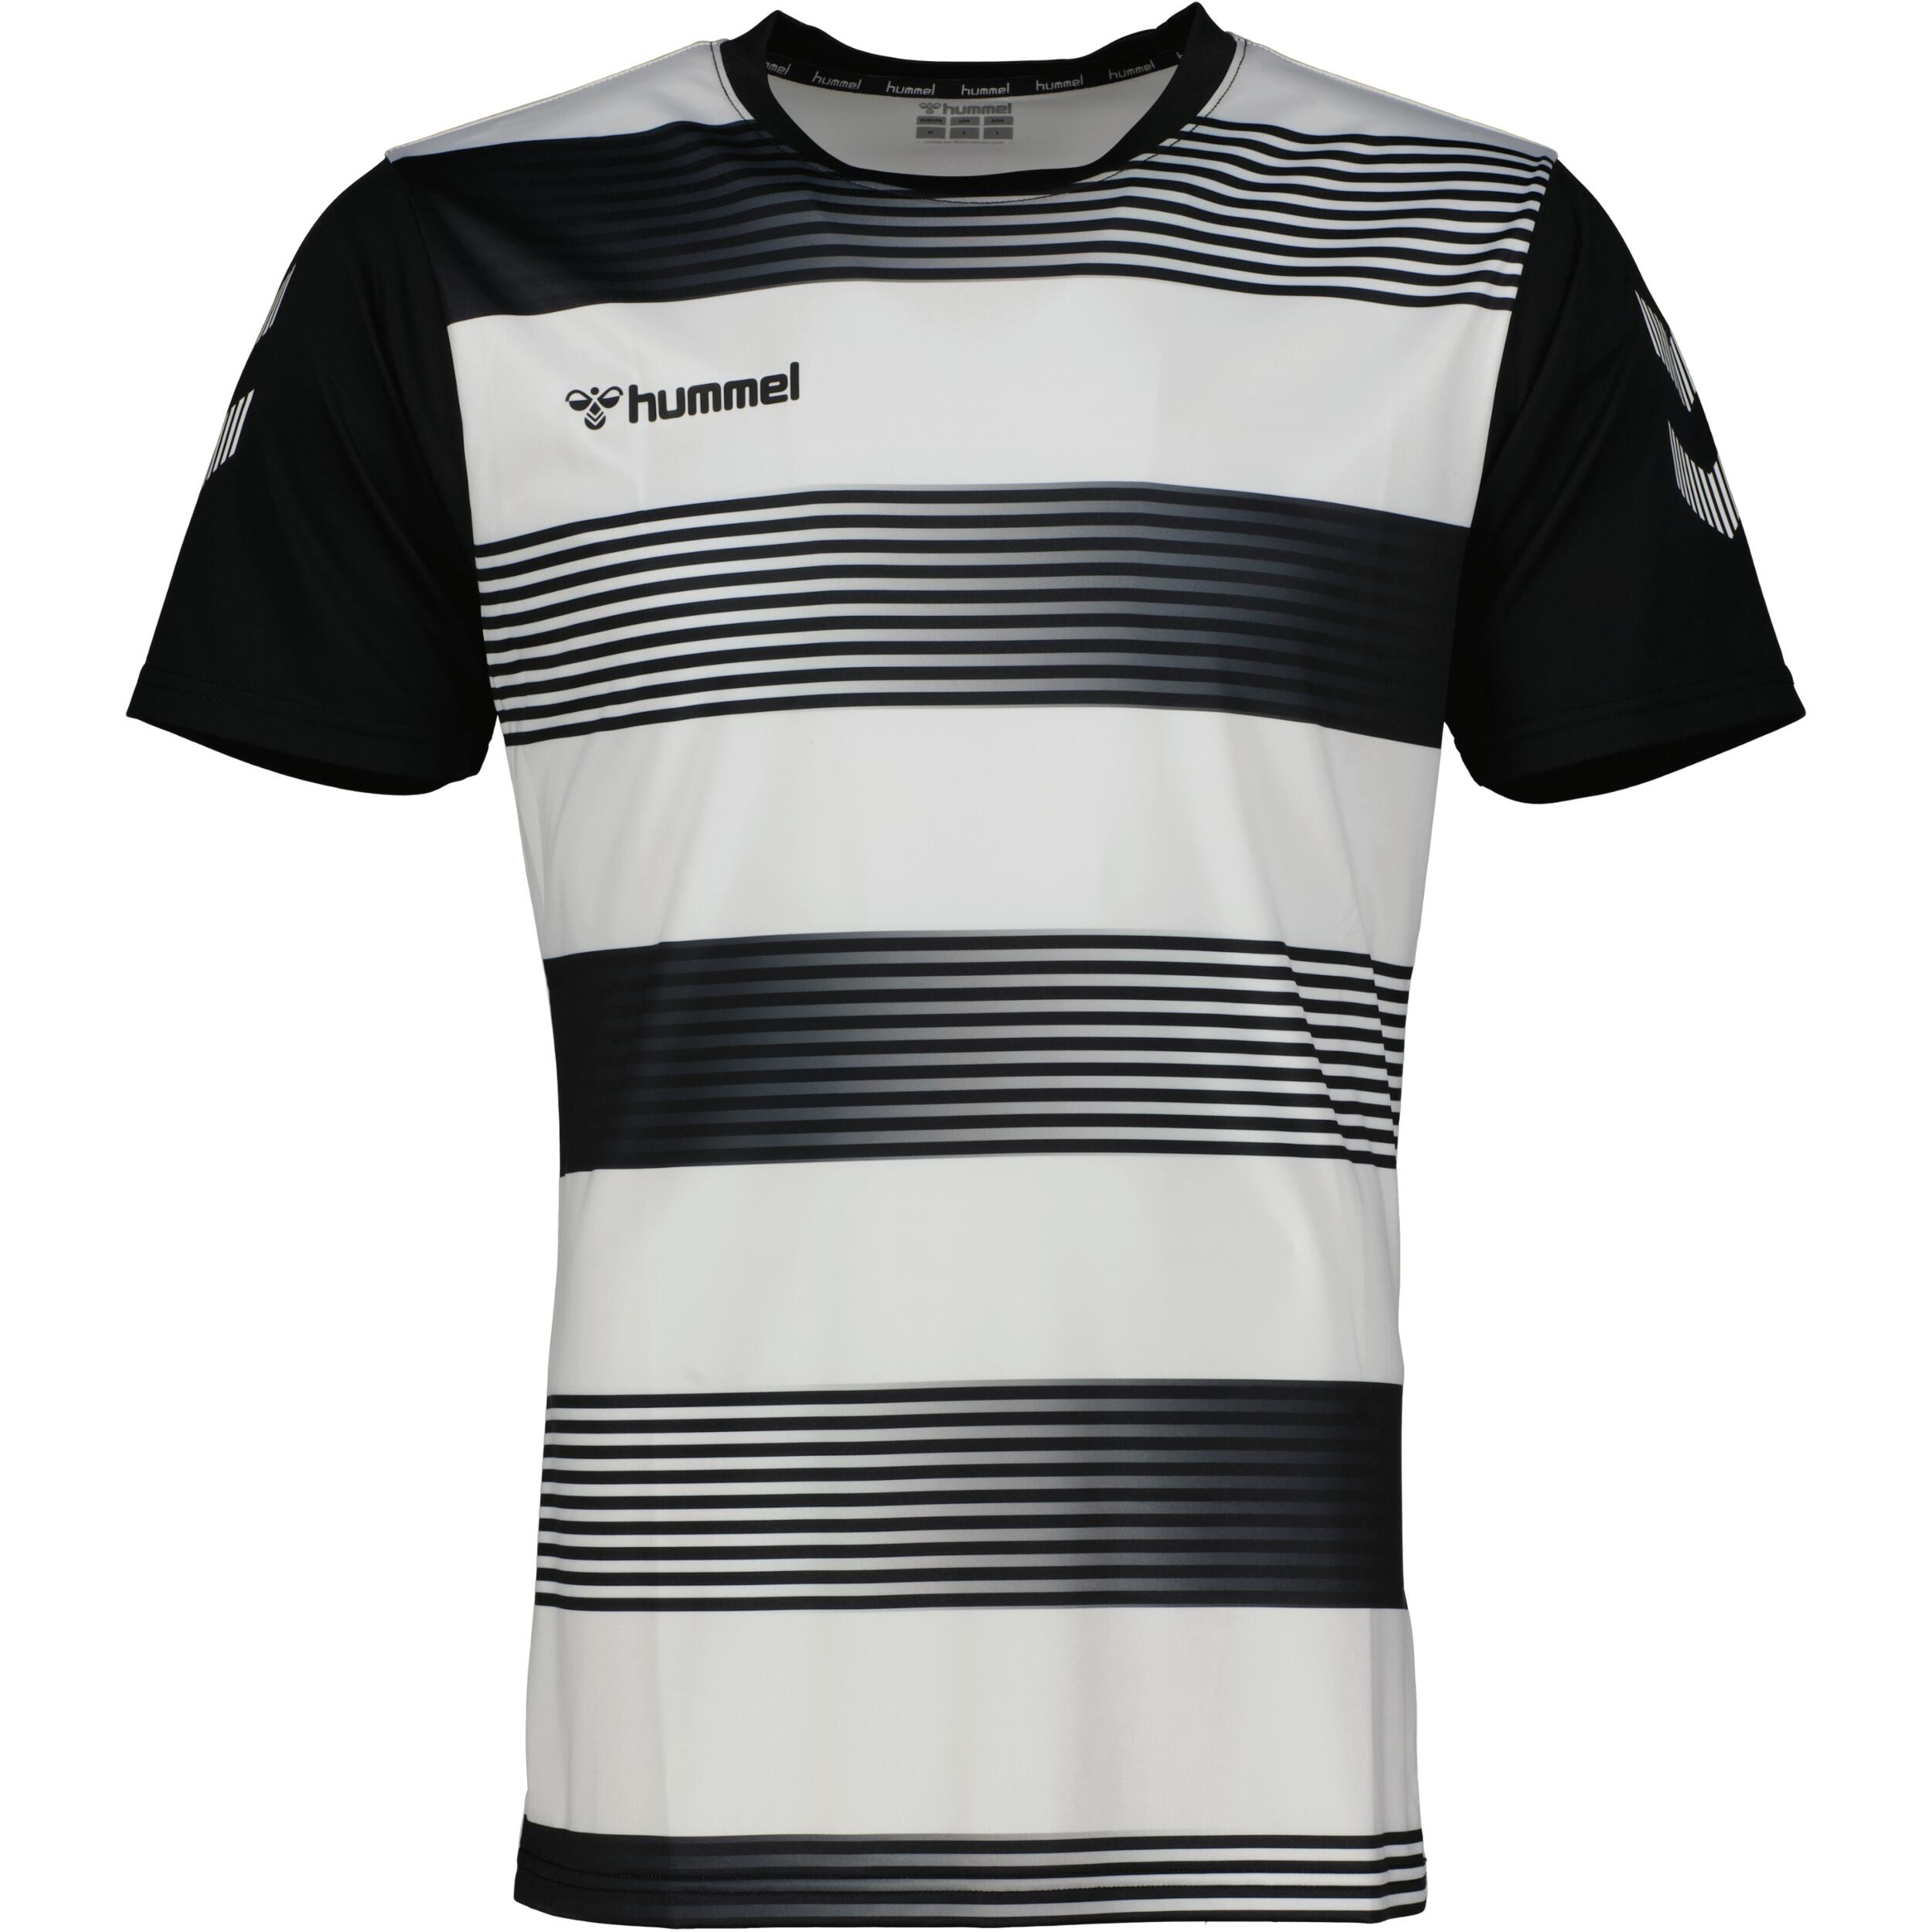 Hoop jersey for juniors, great for football, in black 1/3